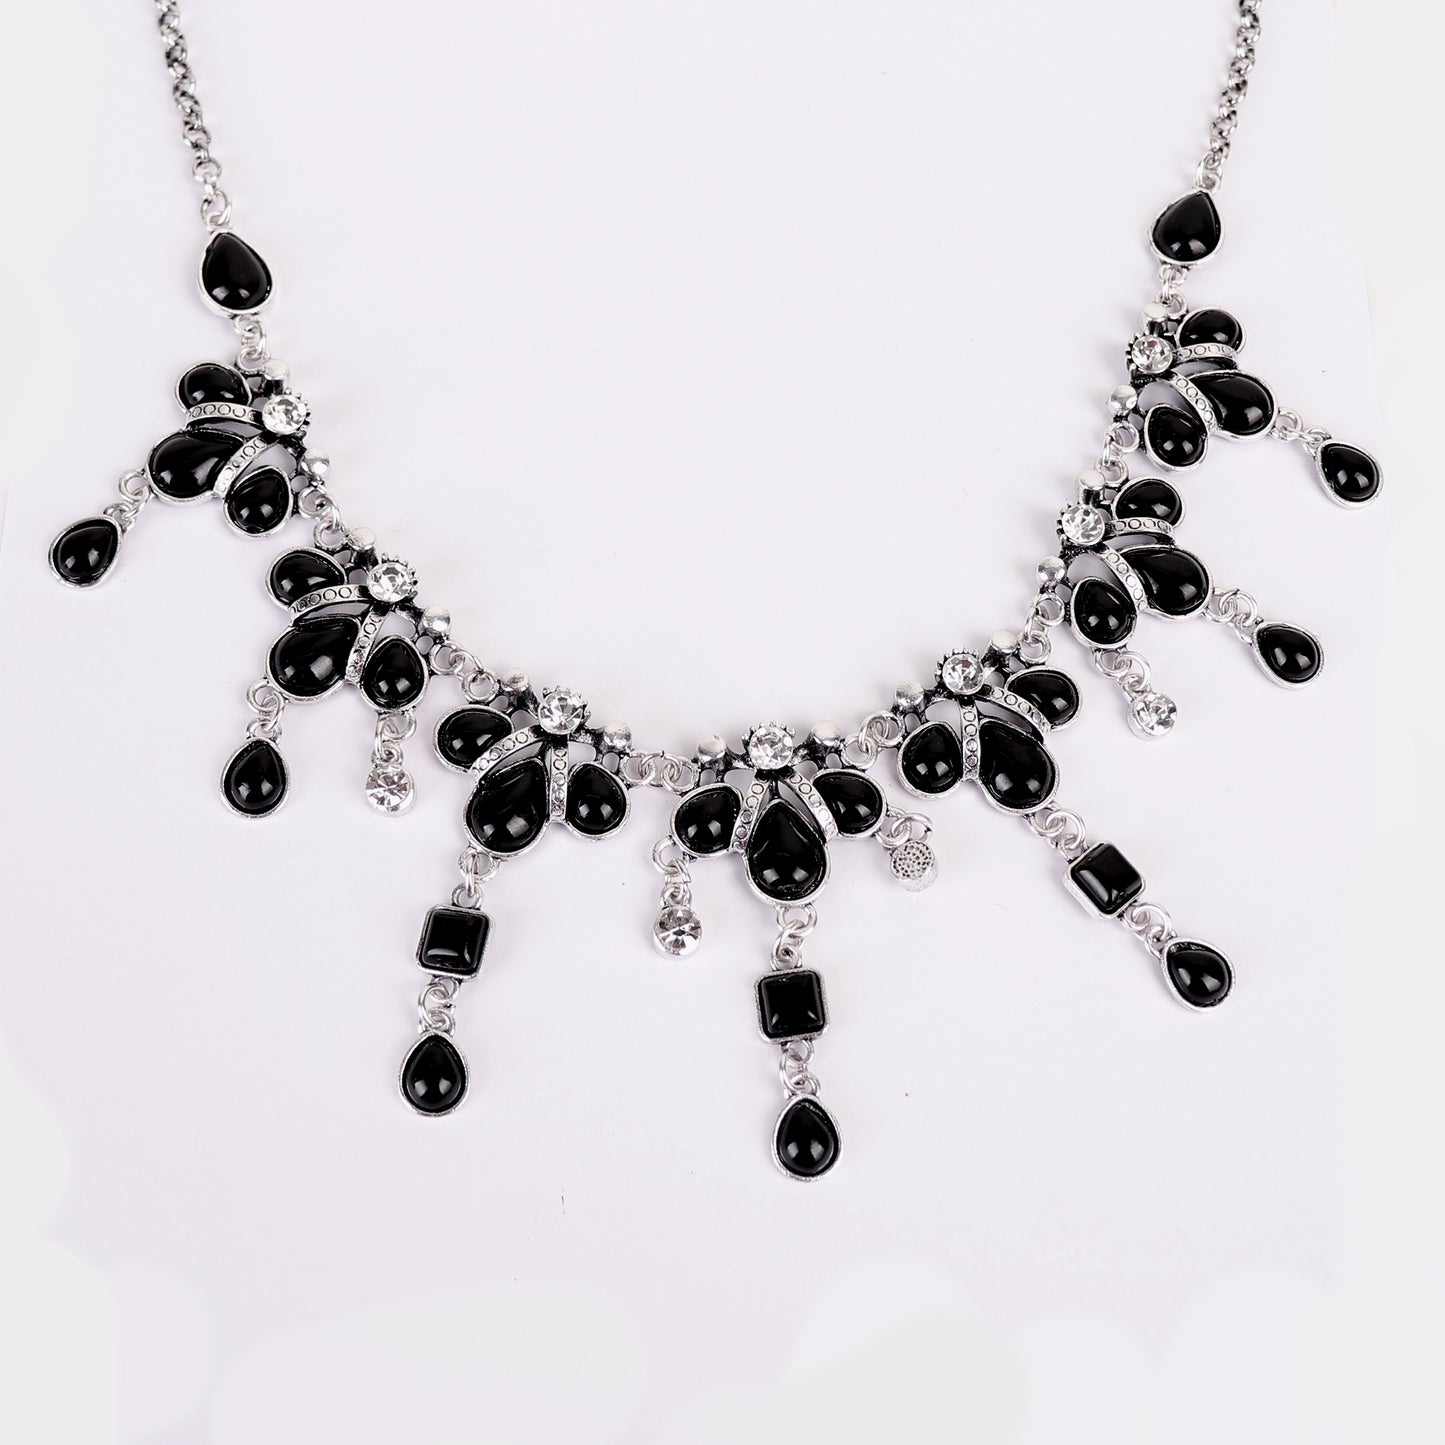 Necklace Set,Queen of Greece Necklace Set in Black - Cippele Multi Store